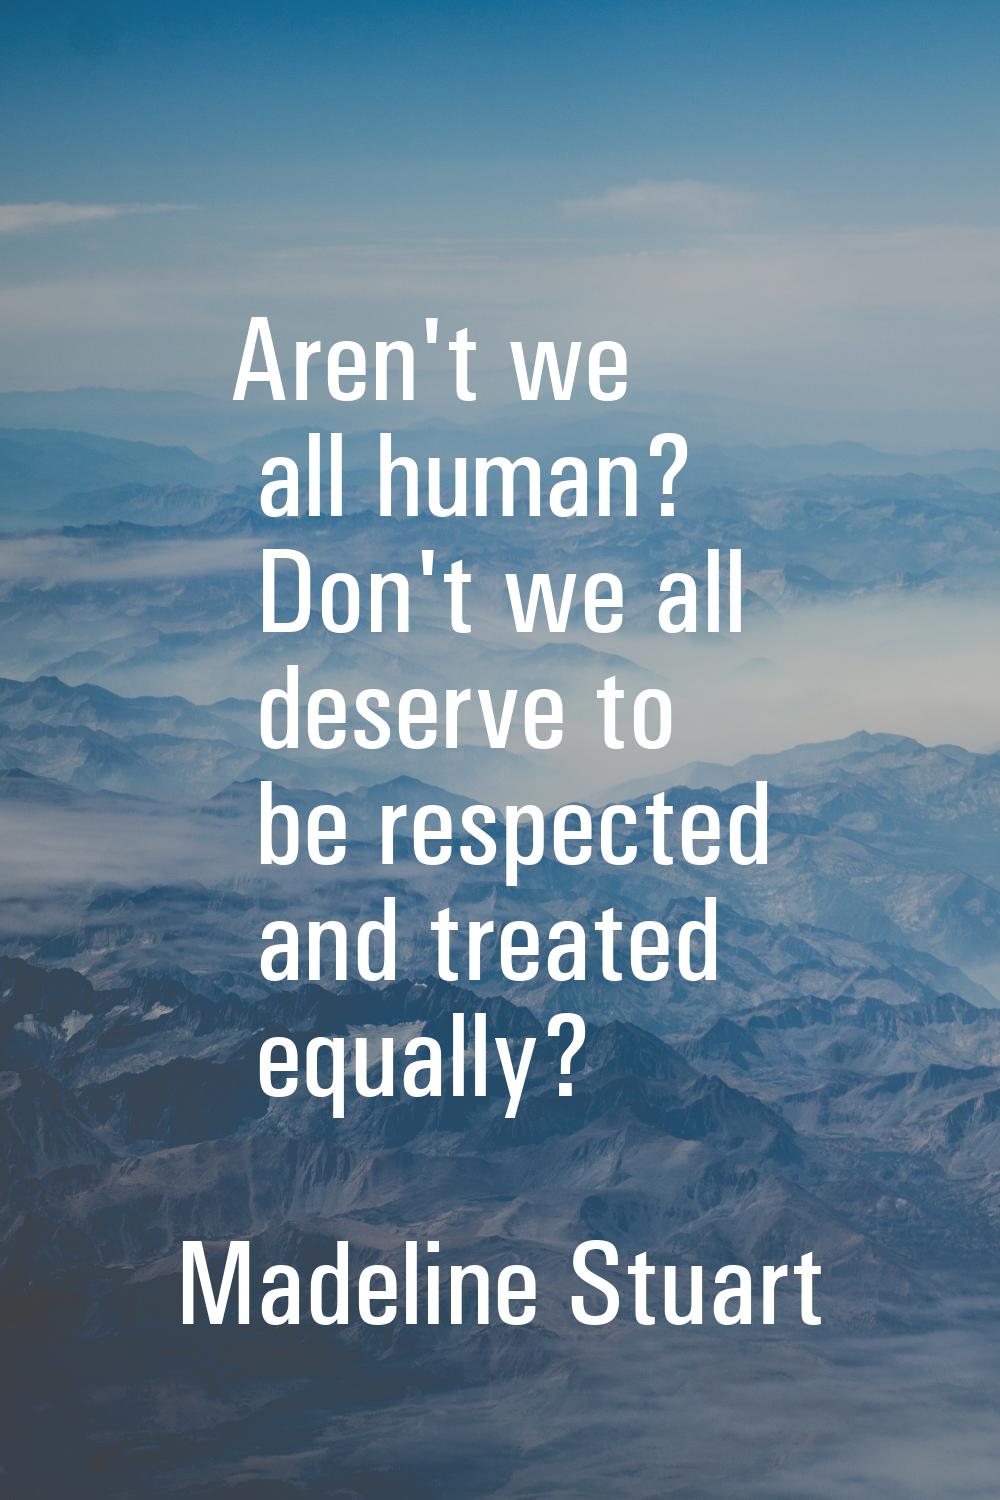 Aren't we all human? Don't we all deserve to be respected and treated equally?